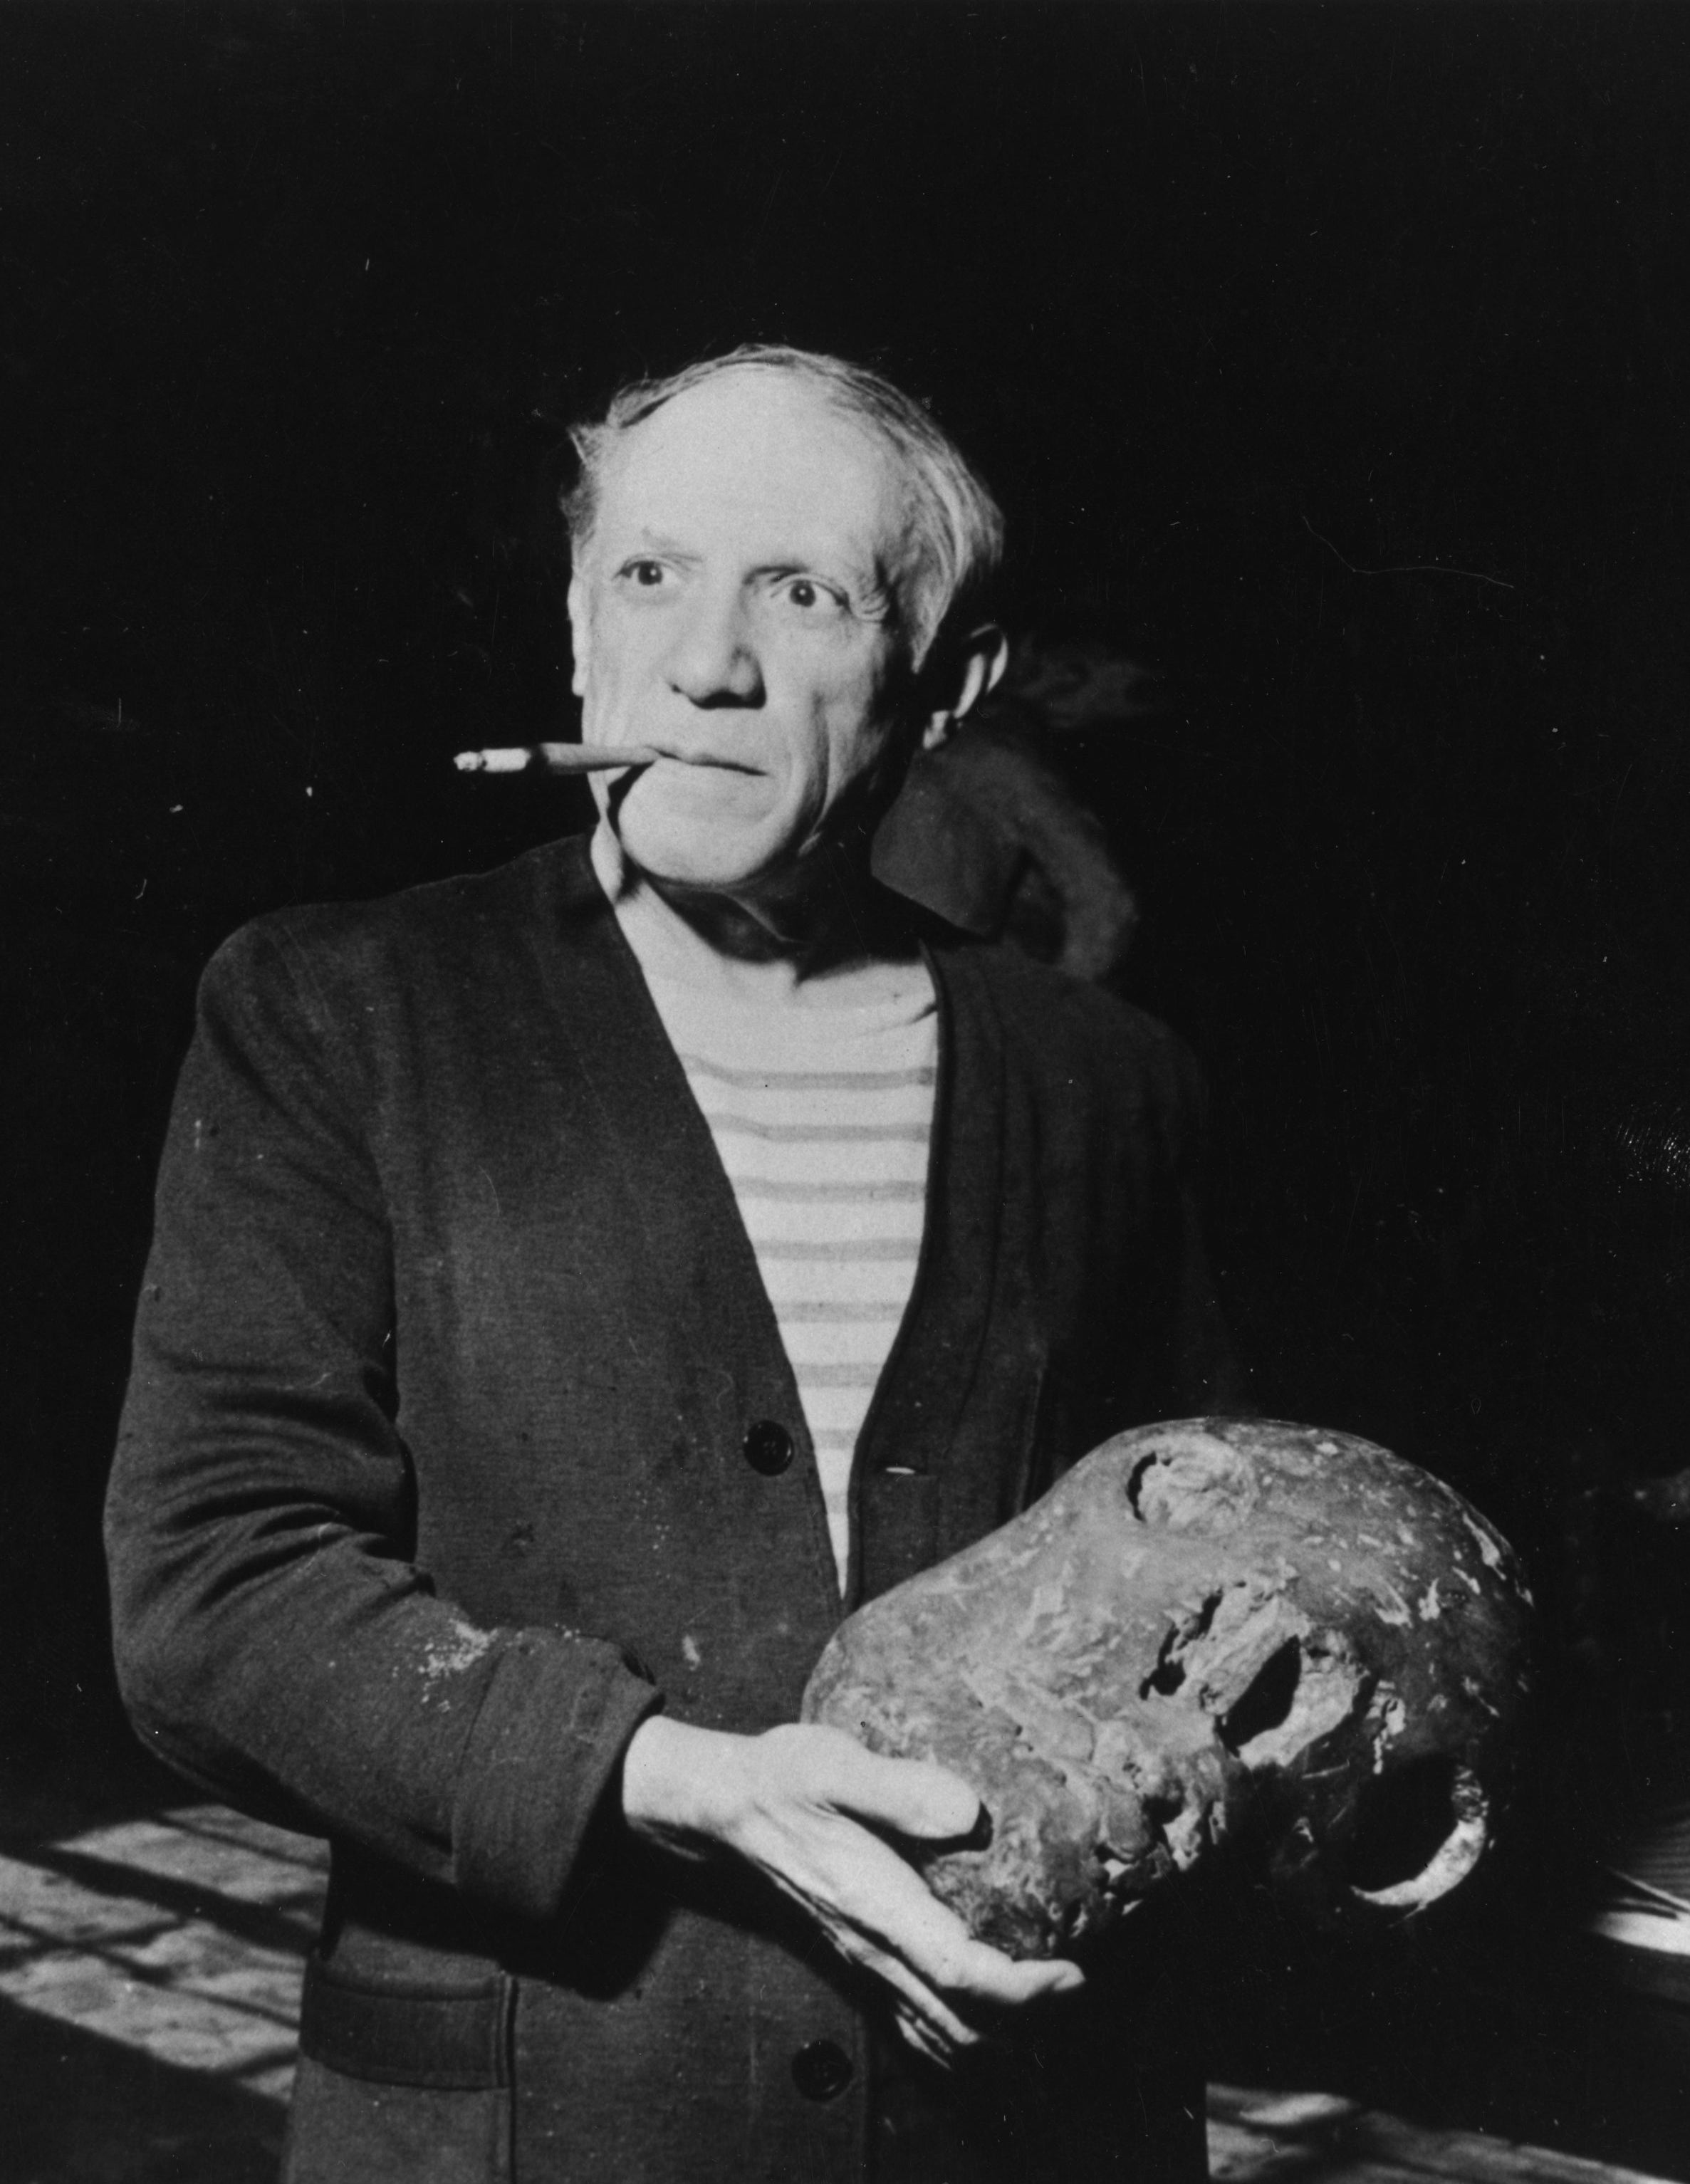 Picasso in 1946